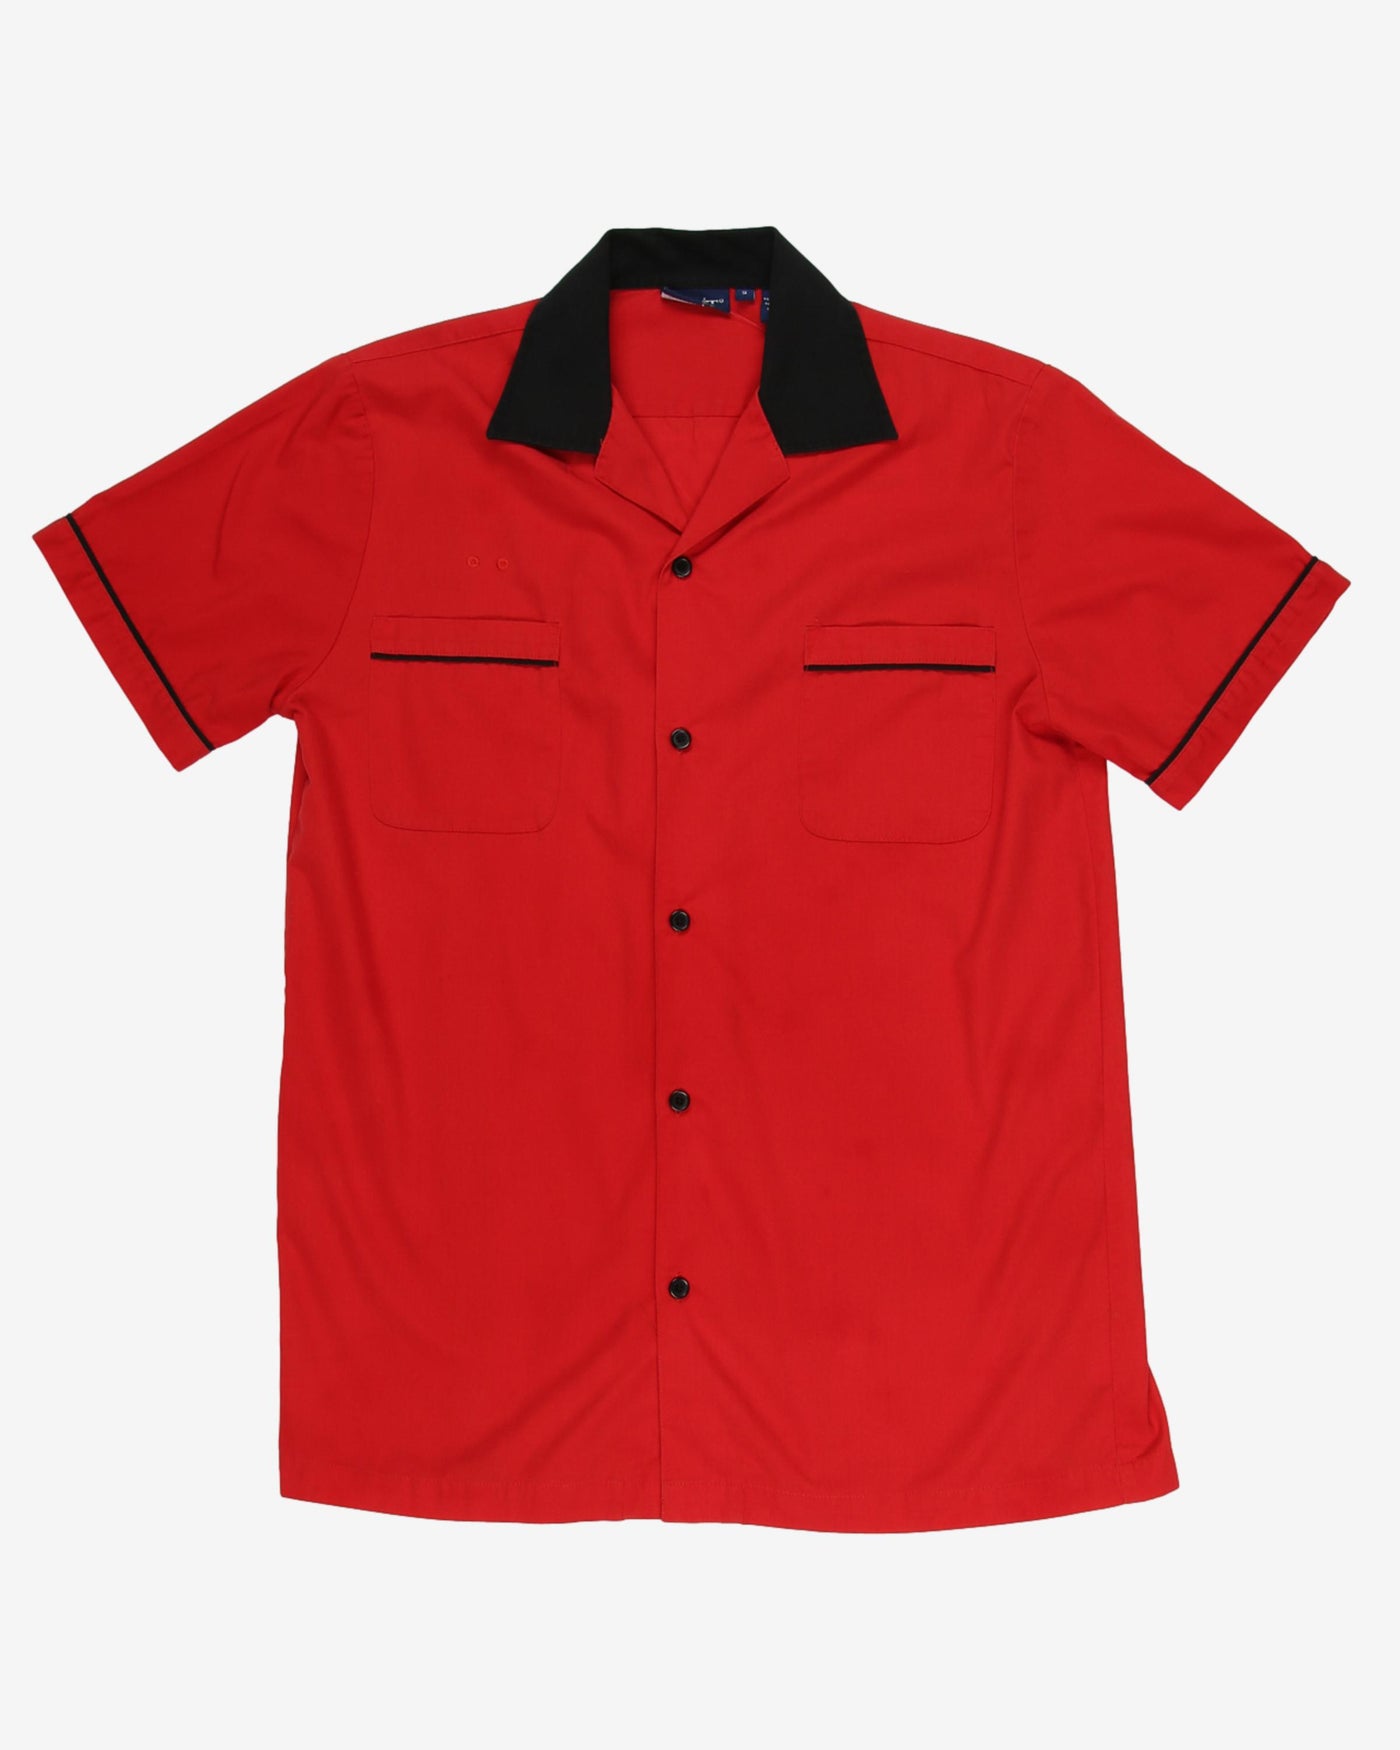 Red and black workwear bowling shirt - M